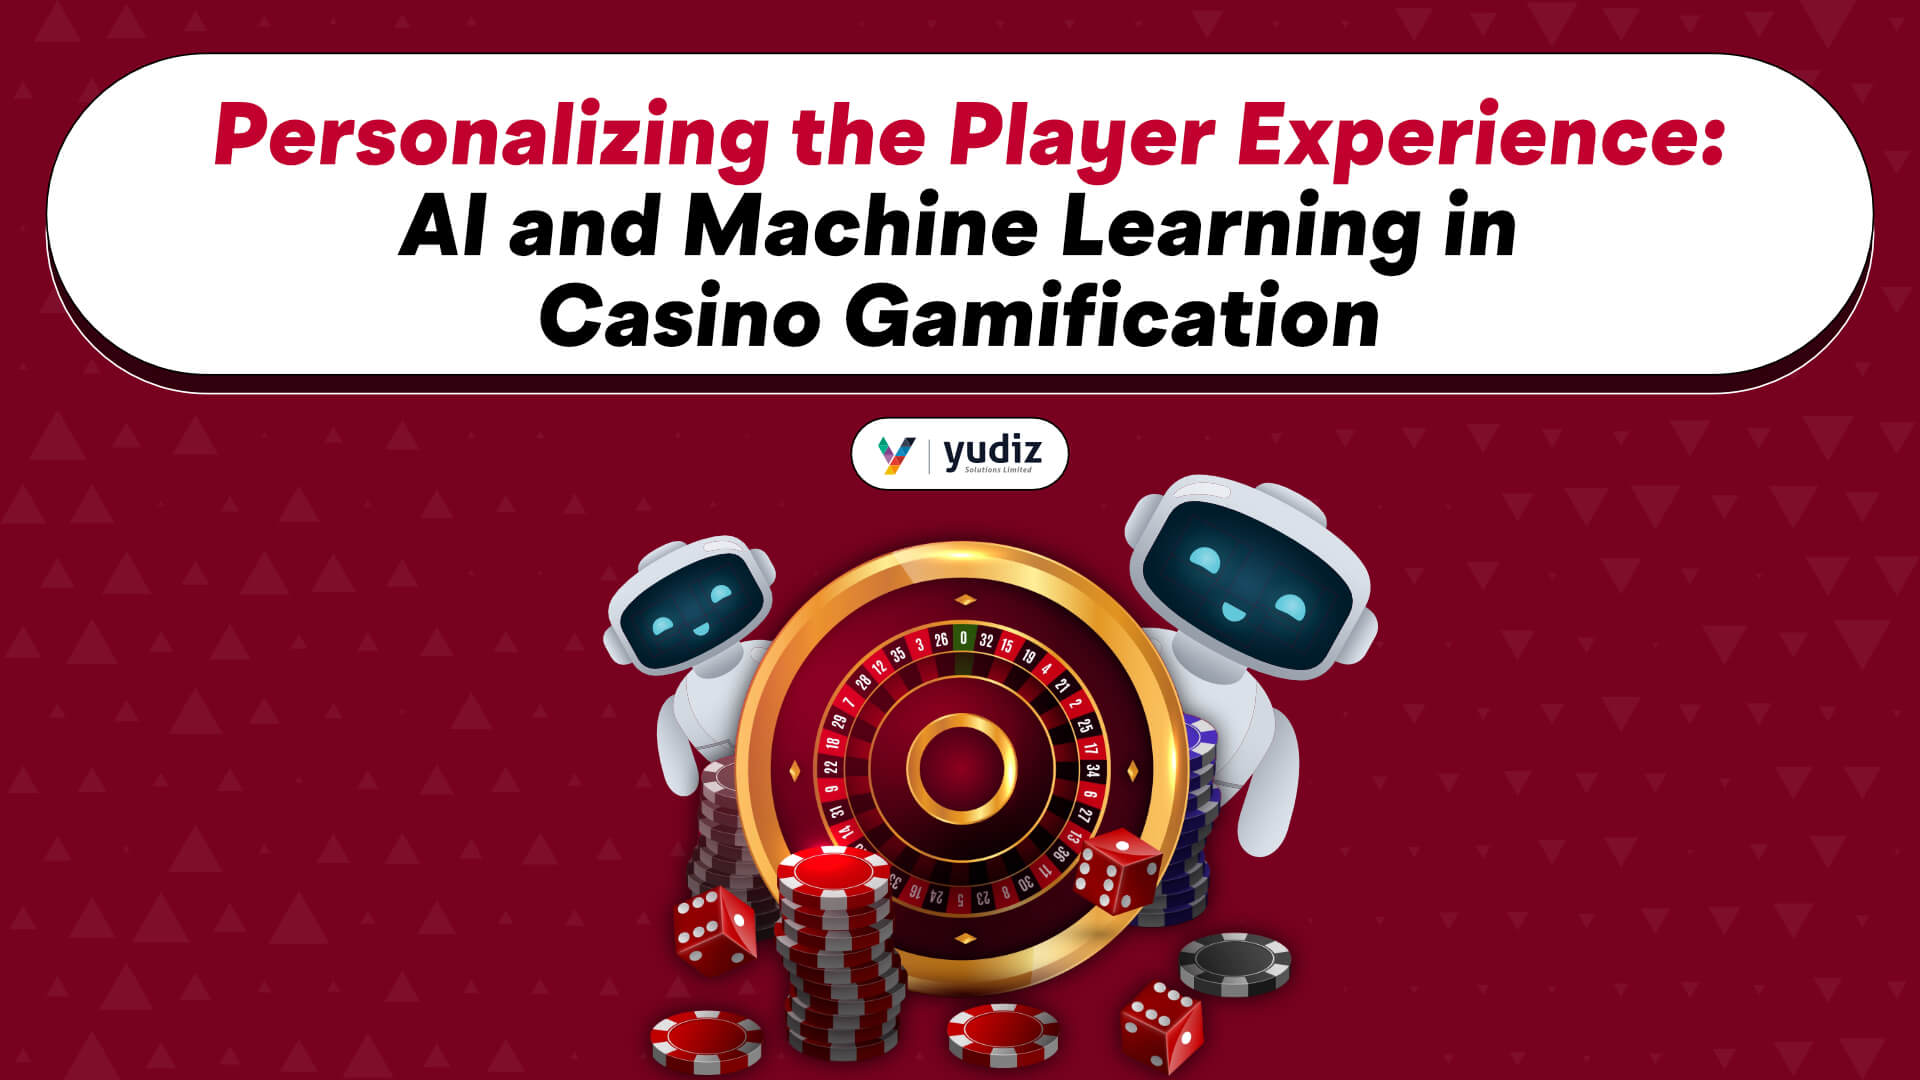 Personalizing the Player Experience: AI and Machine Learning in Casino Gamification